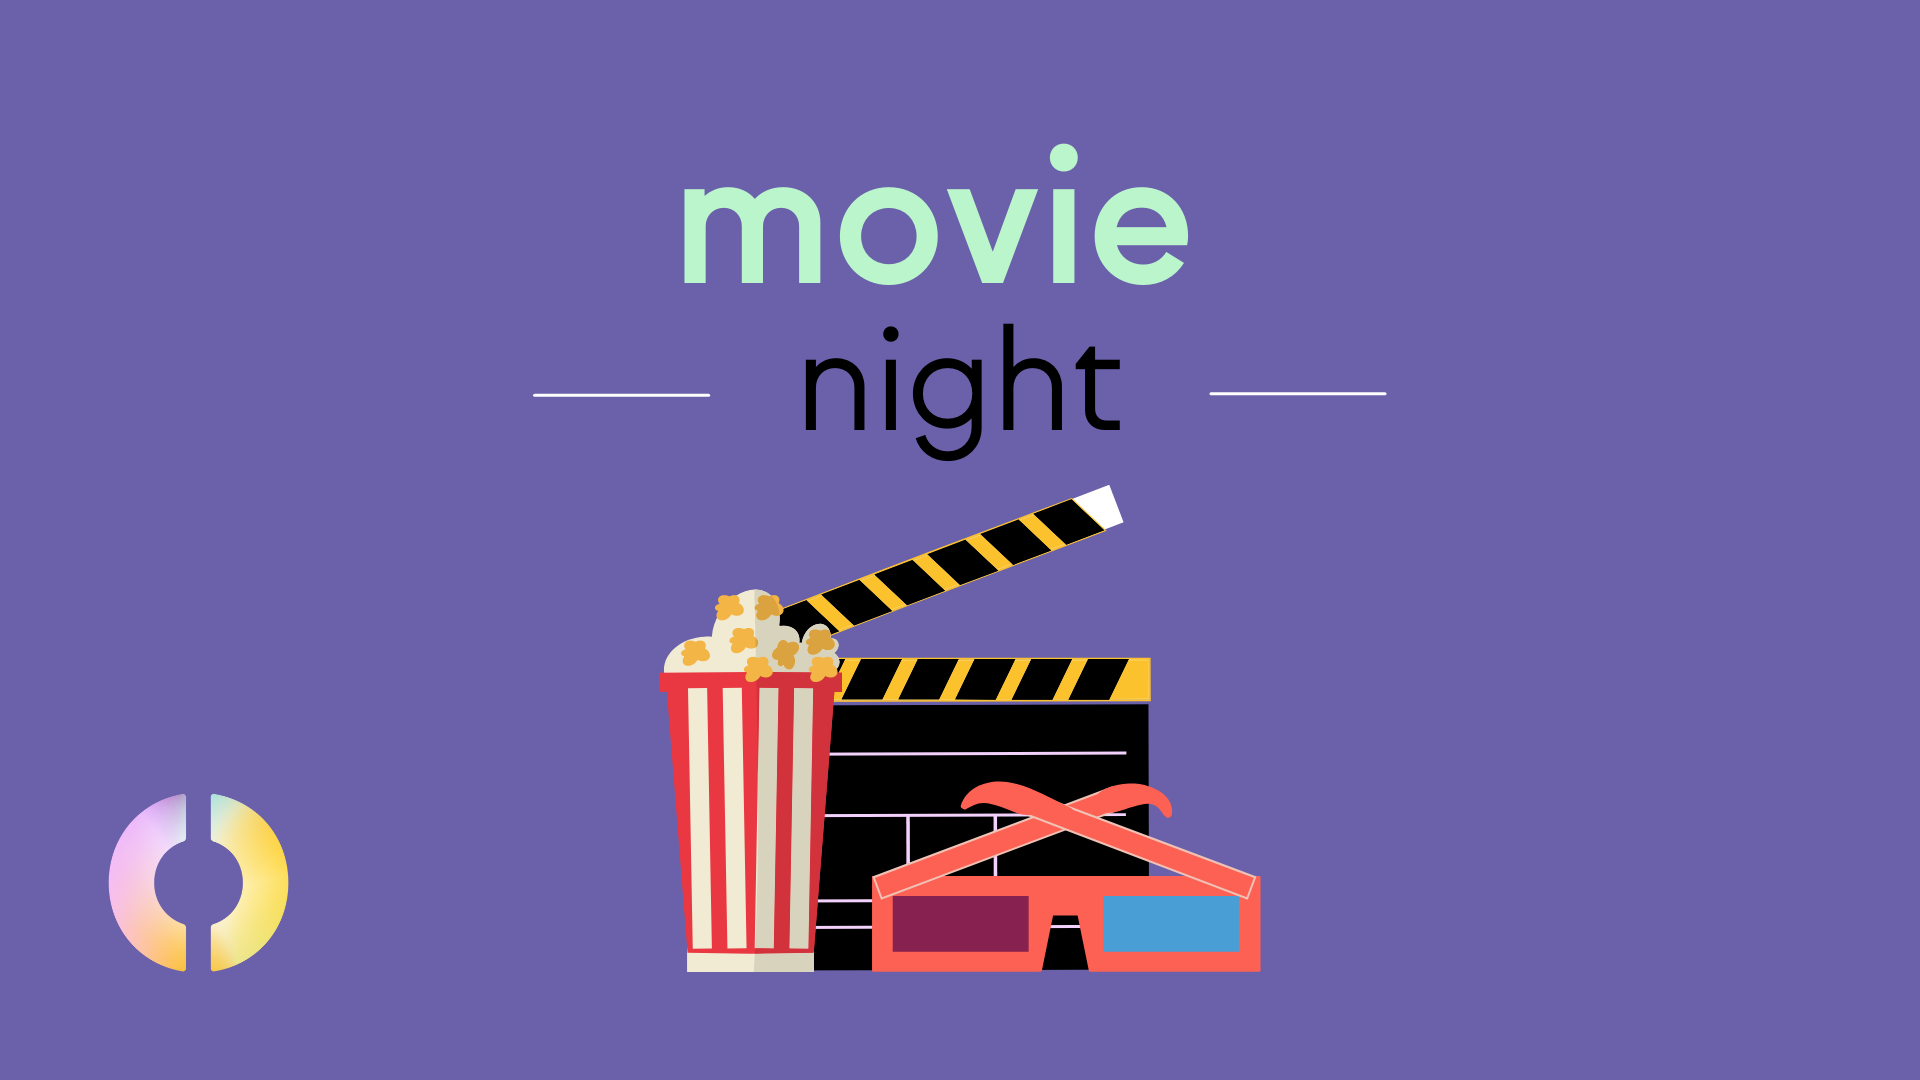 Animated graphics of popcorn, 3D glasses, and a film clapper board on a purple back ground, with text above that reads "movie night."